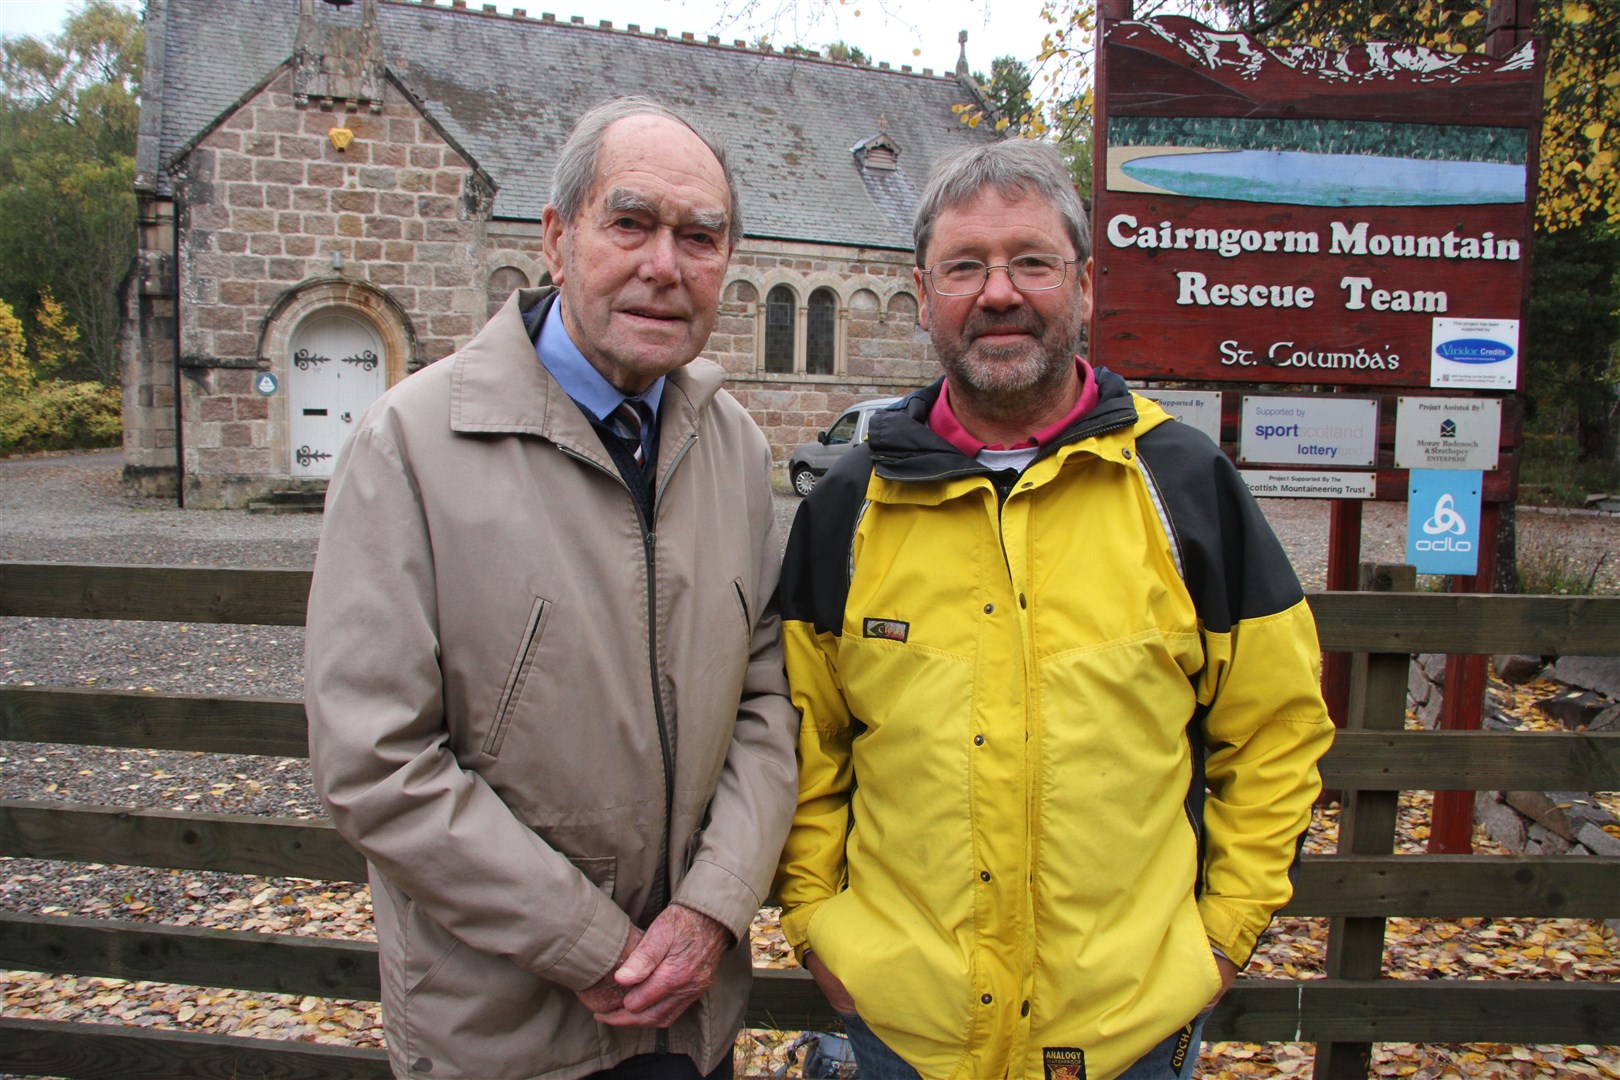 Two former Cairngorm Mountain Rescue Team leaders Alistair McCook and Willie Anderson.